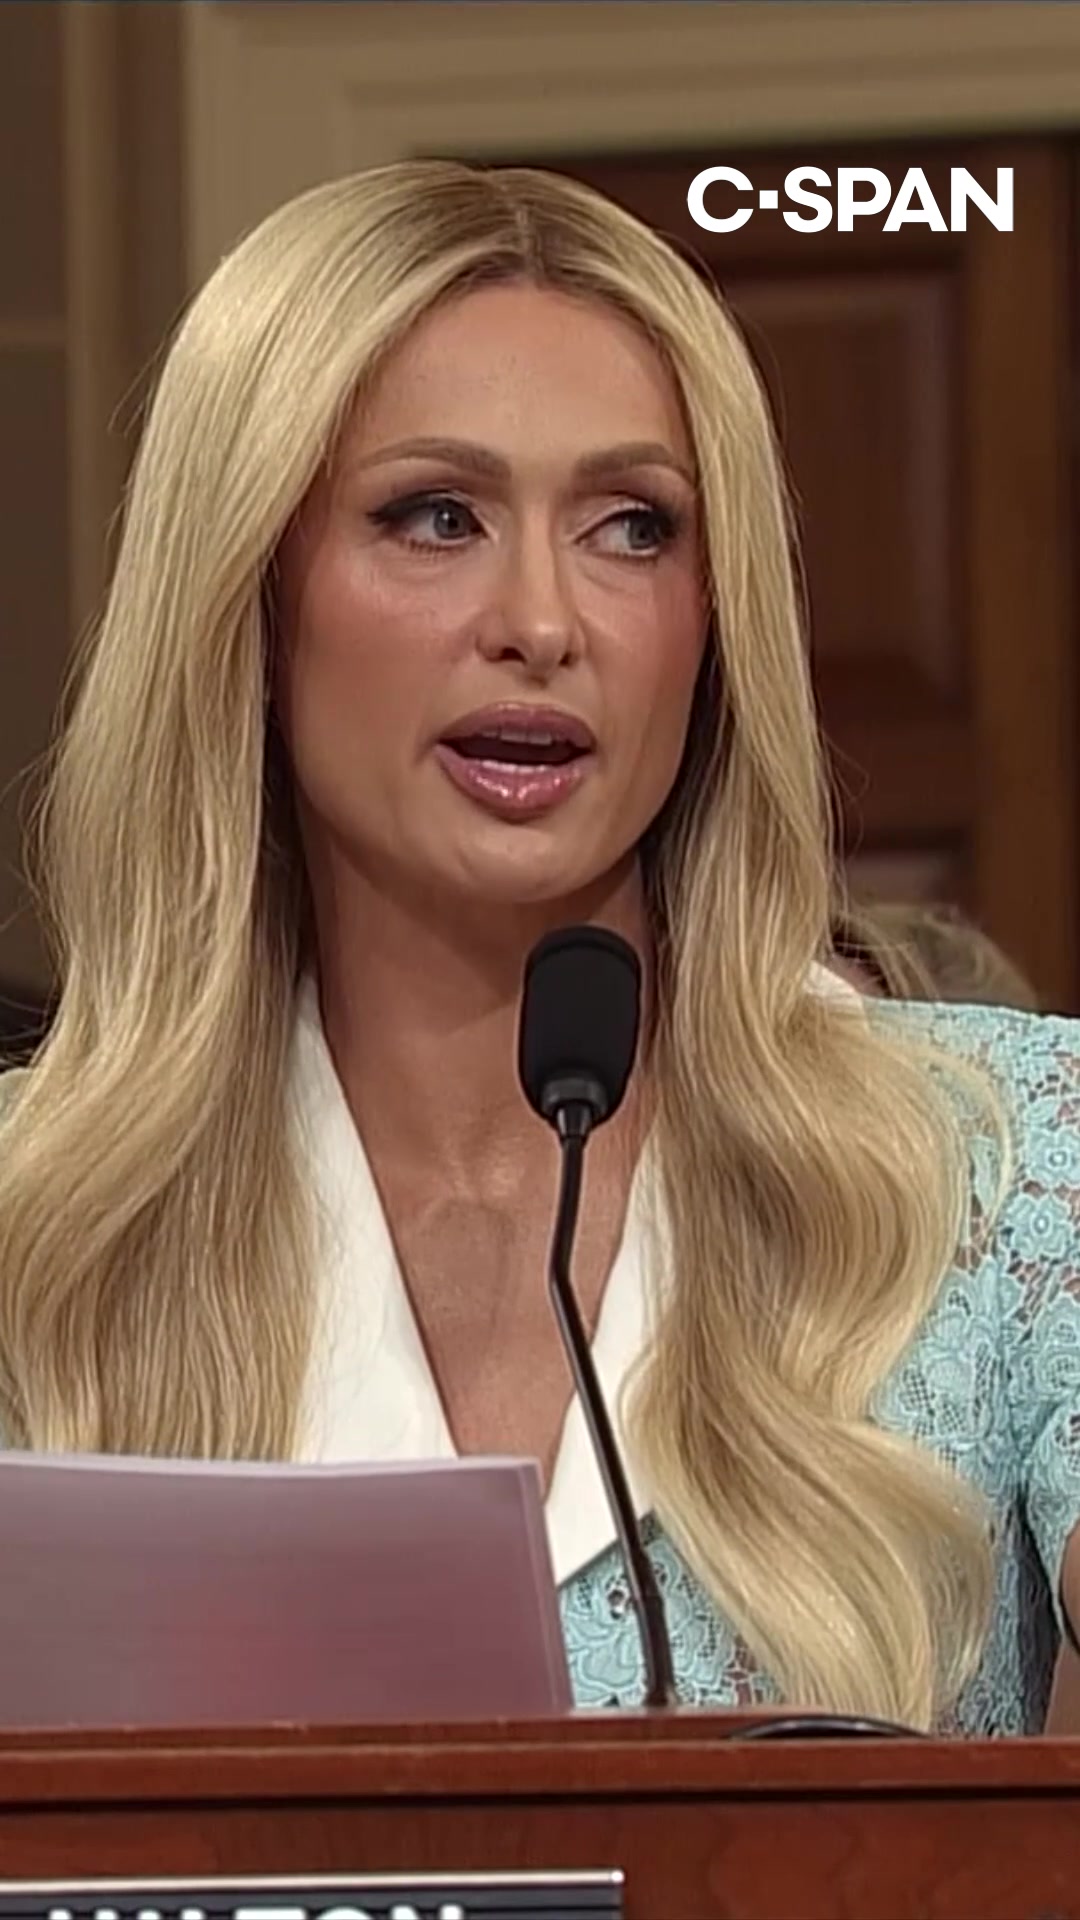 Paris Hilton appeared Wednesday before a congressional committee to testify on improving child welfare programs.   “The treatment these kids have had to endure is criminal,” Ms. Hilton, a child welfare advocate, told the House Ways and Means Committee. “I am here to be the voice for the children whose voices can’t be heard … I will not stop until America’s youth is safe.”   She spoke directly to those in the system, saying, “I see you, I believe you, I know what you’re going through, and I won’t give up on you.”   In 2020, Ms. Hilton said she experienced sexual, physical and mental abuse at Provo Canyon School, a youth residential treatment facility that her parents sent her to as a child.